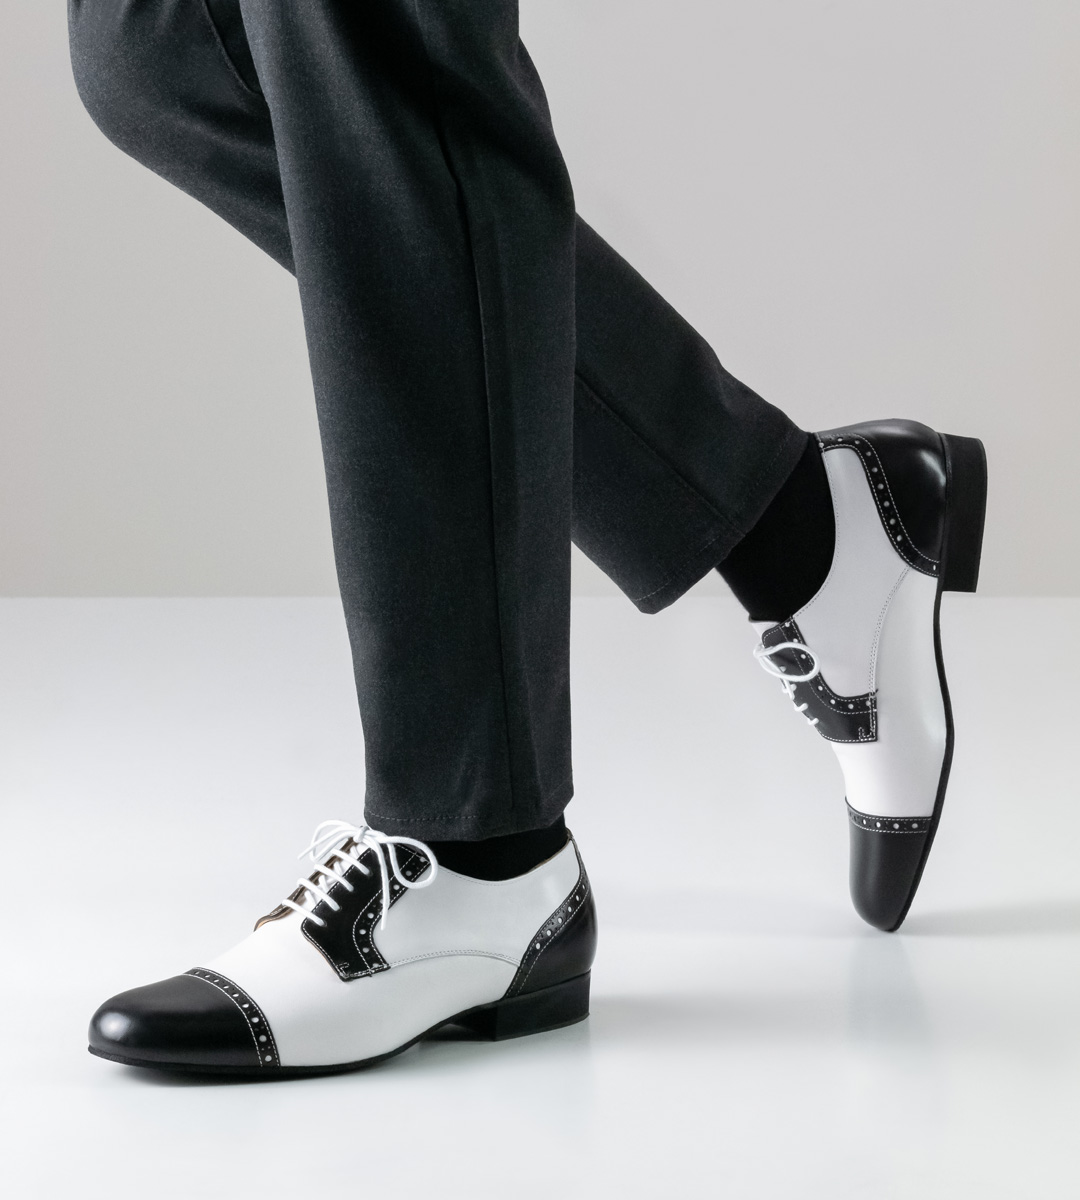 two-tone men's dance shoe from Werner Kern in leather